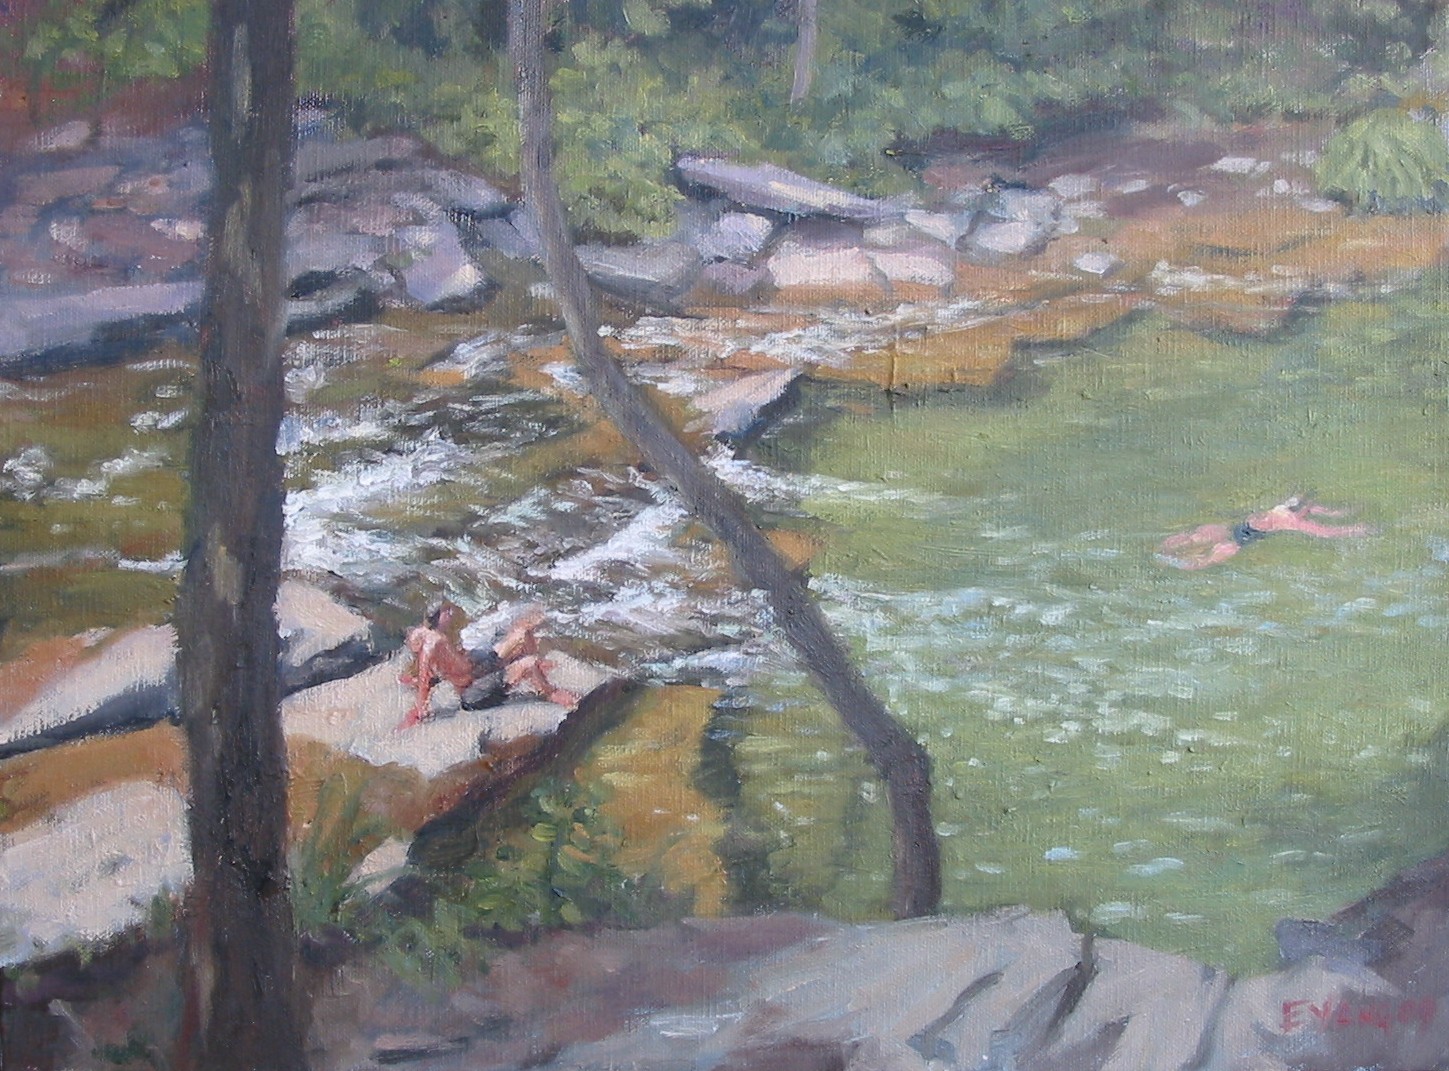 Swimming Hole, oil on canvas, 12 x 16 inches